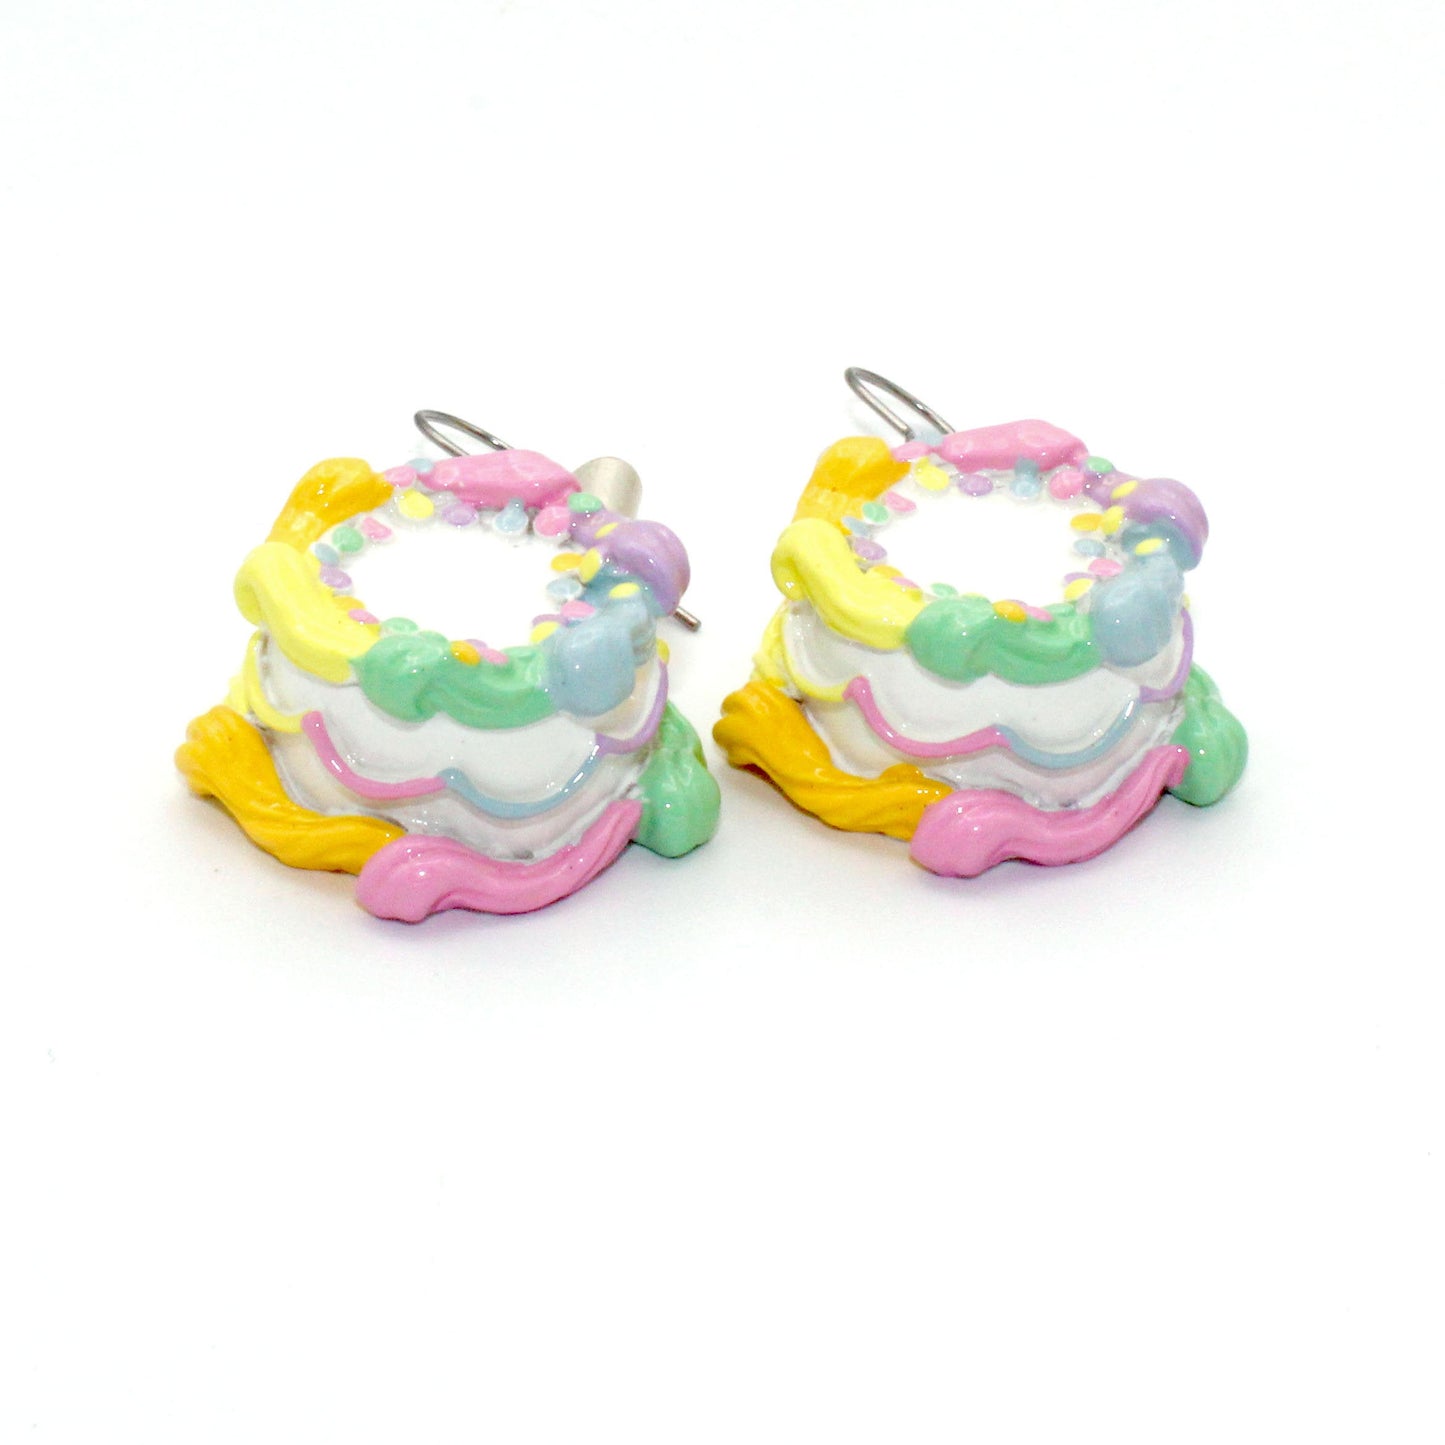 Pastel Rainbow Birthday Cake Earrings - Gold or Silver